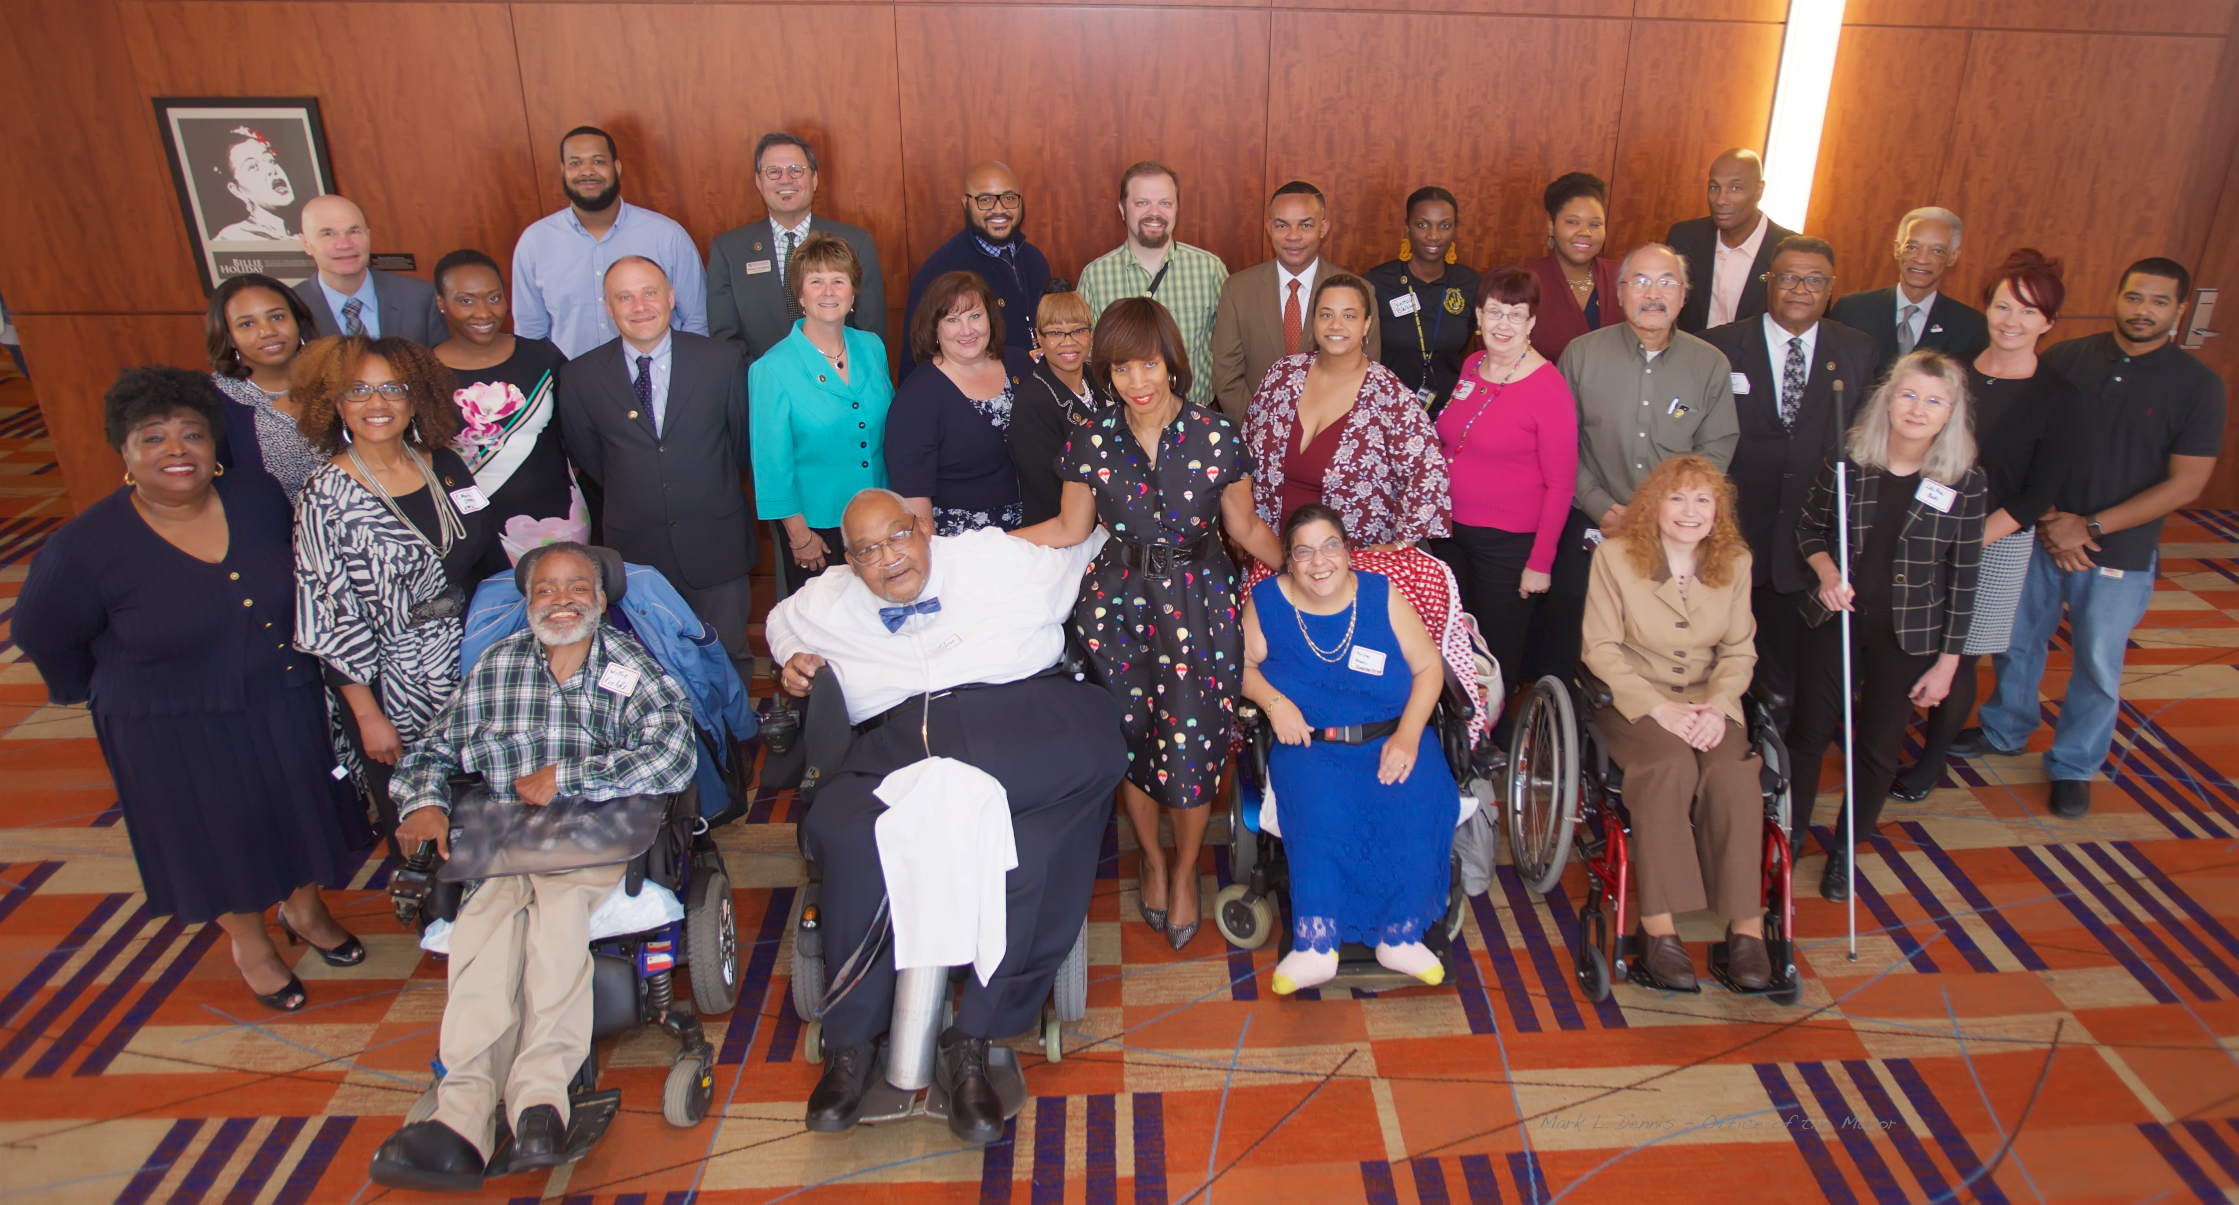 Commission on Disabilities Luncheon